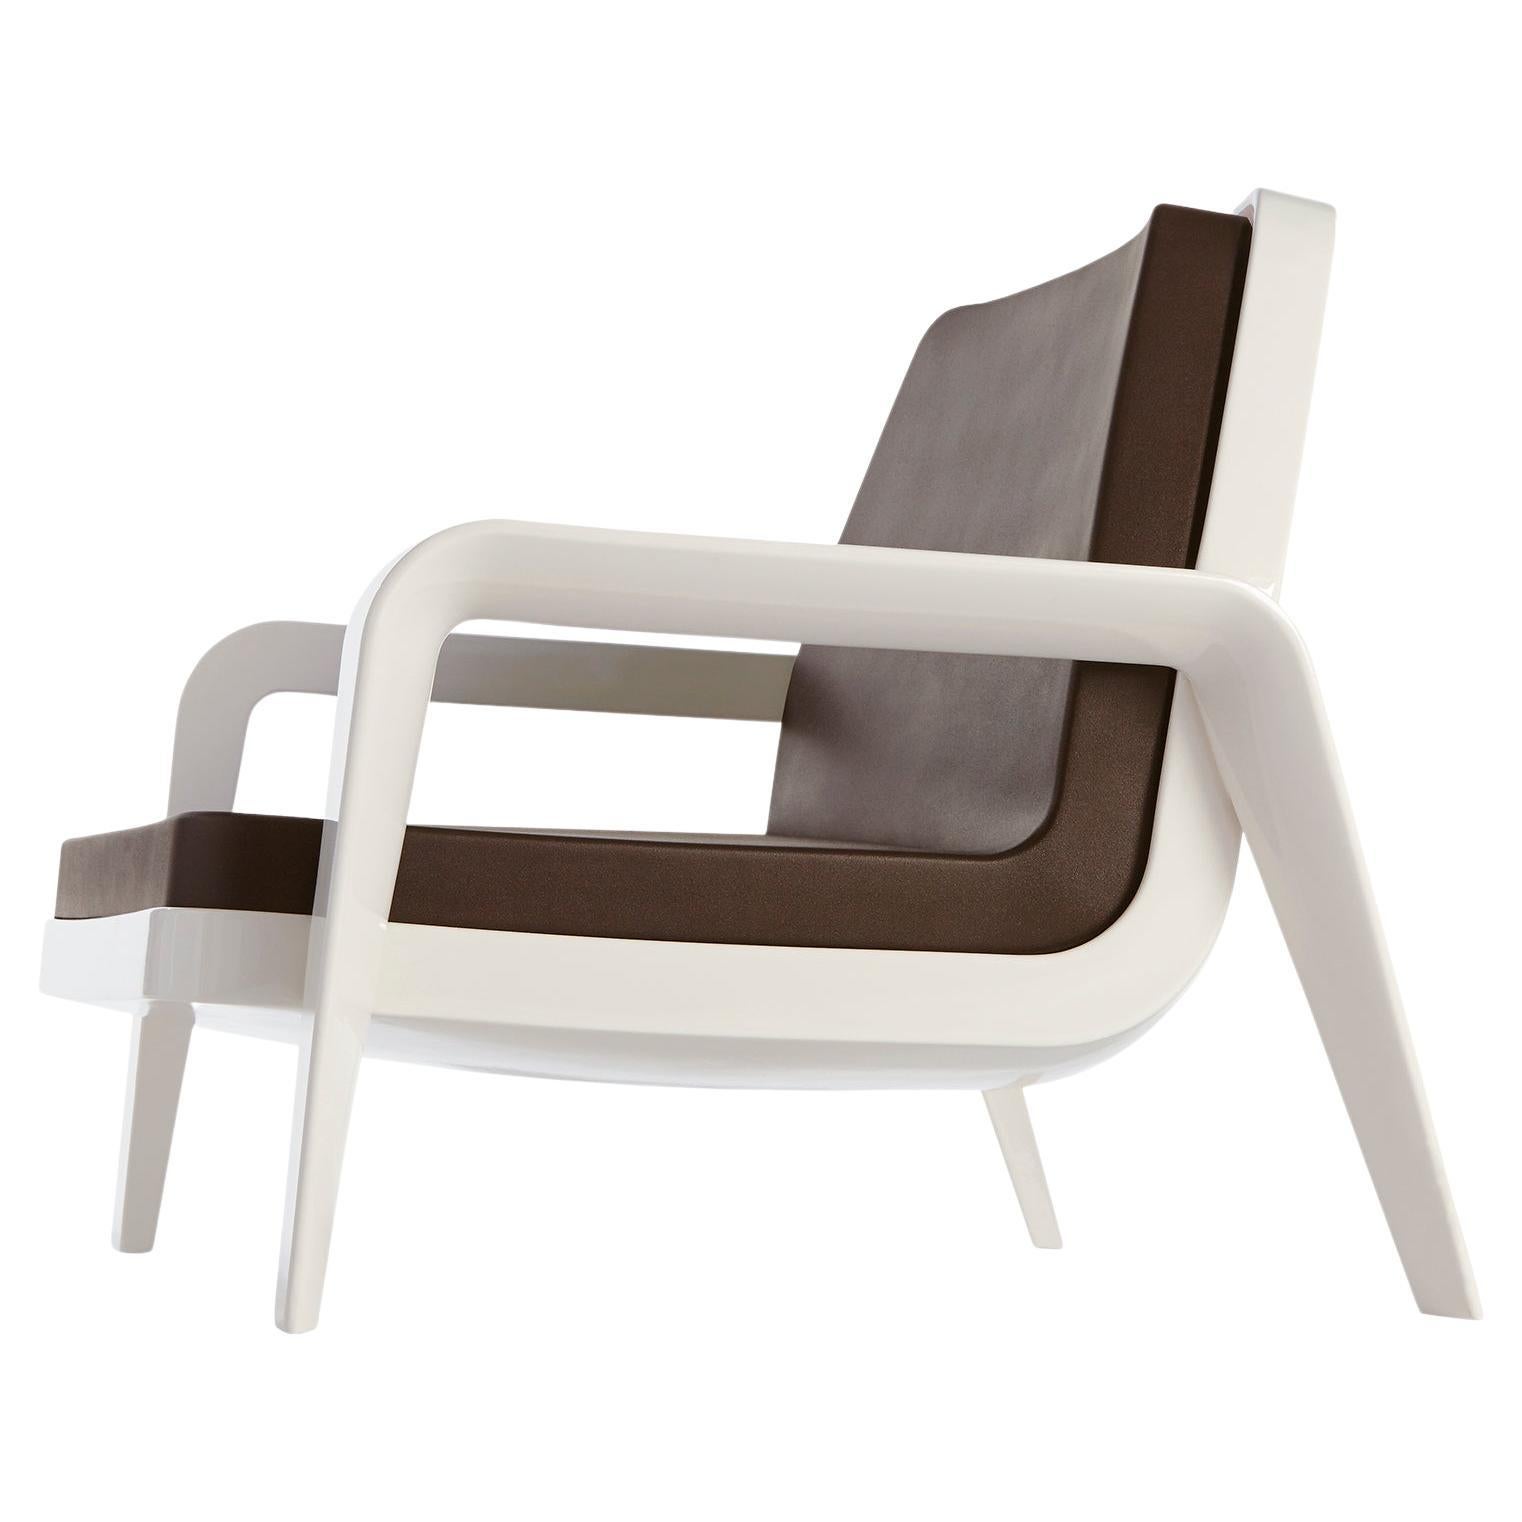 Slide Design America Armchair in Soft Chocolate Fabric with Milky White Frame For Sale